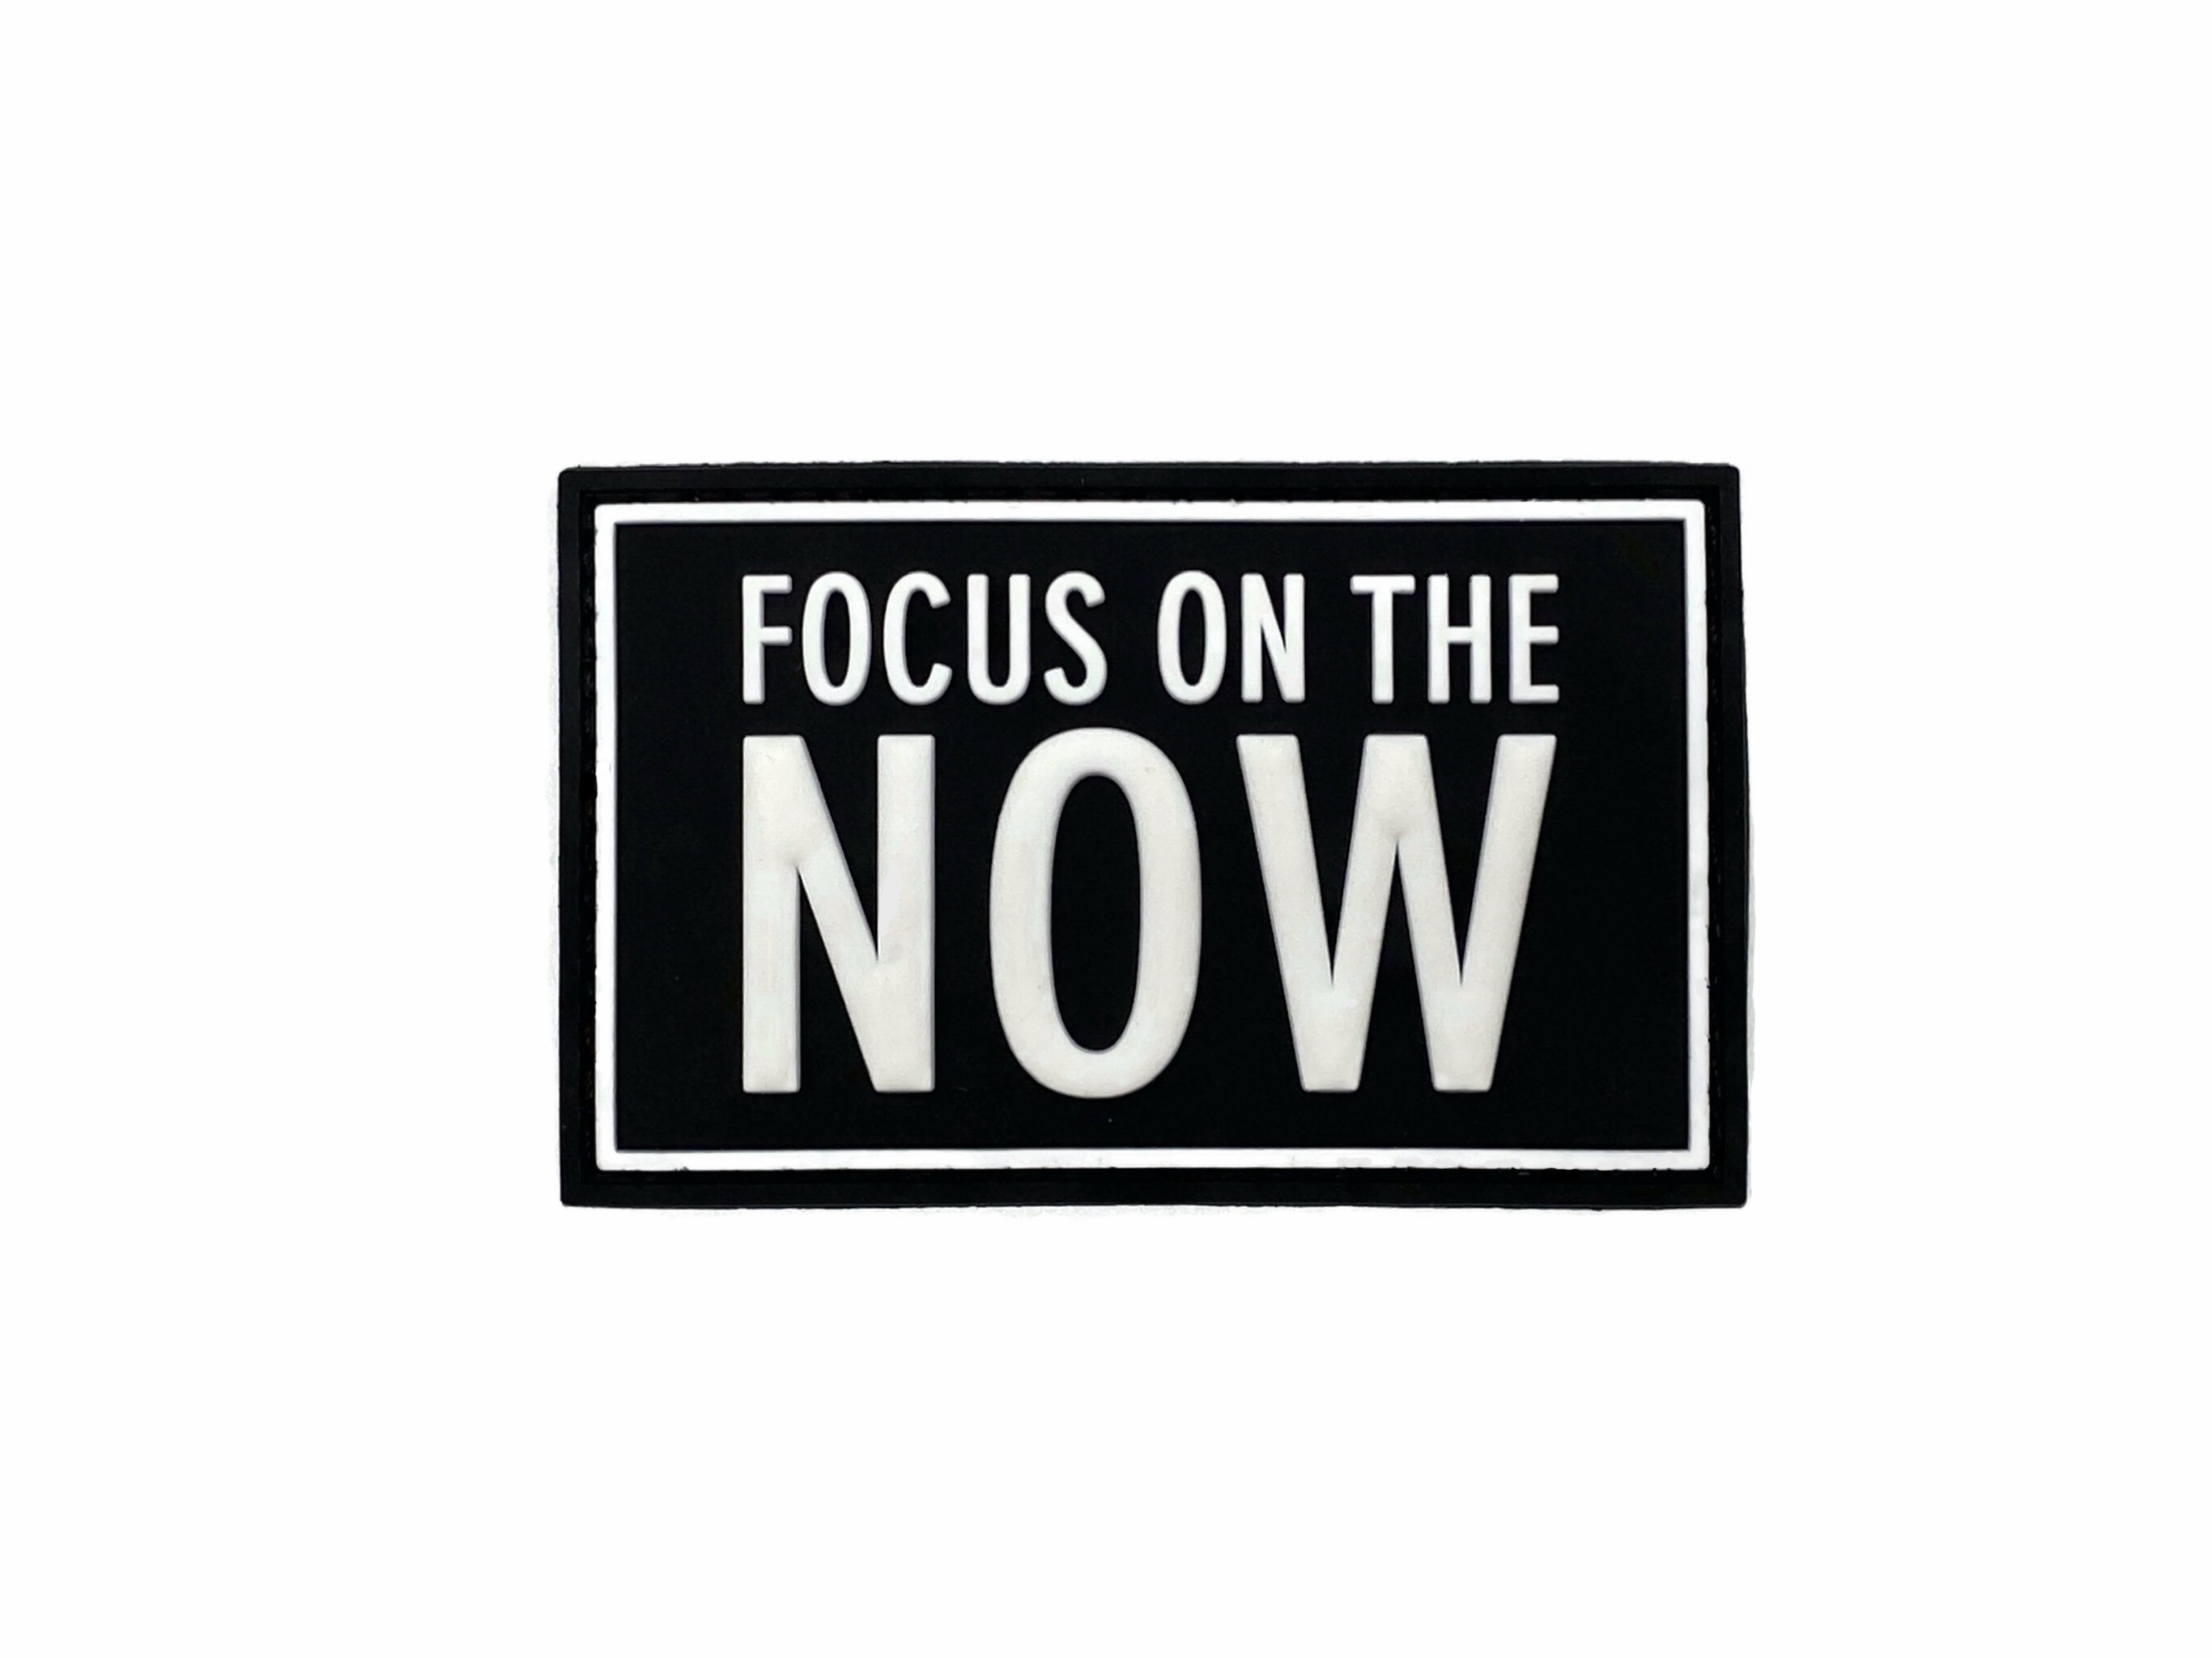 Focus on the now